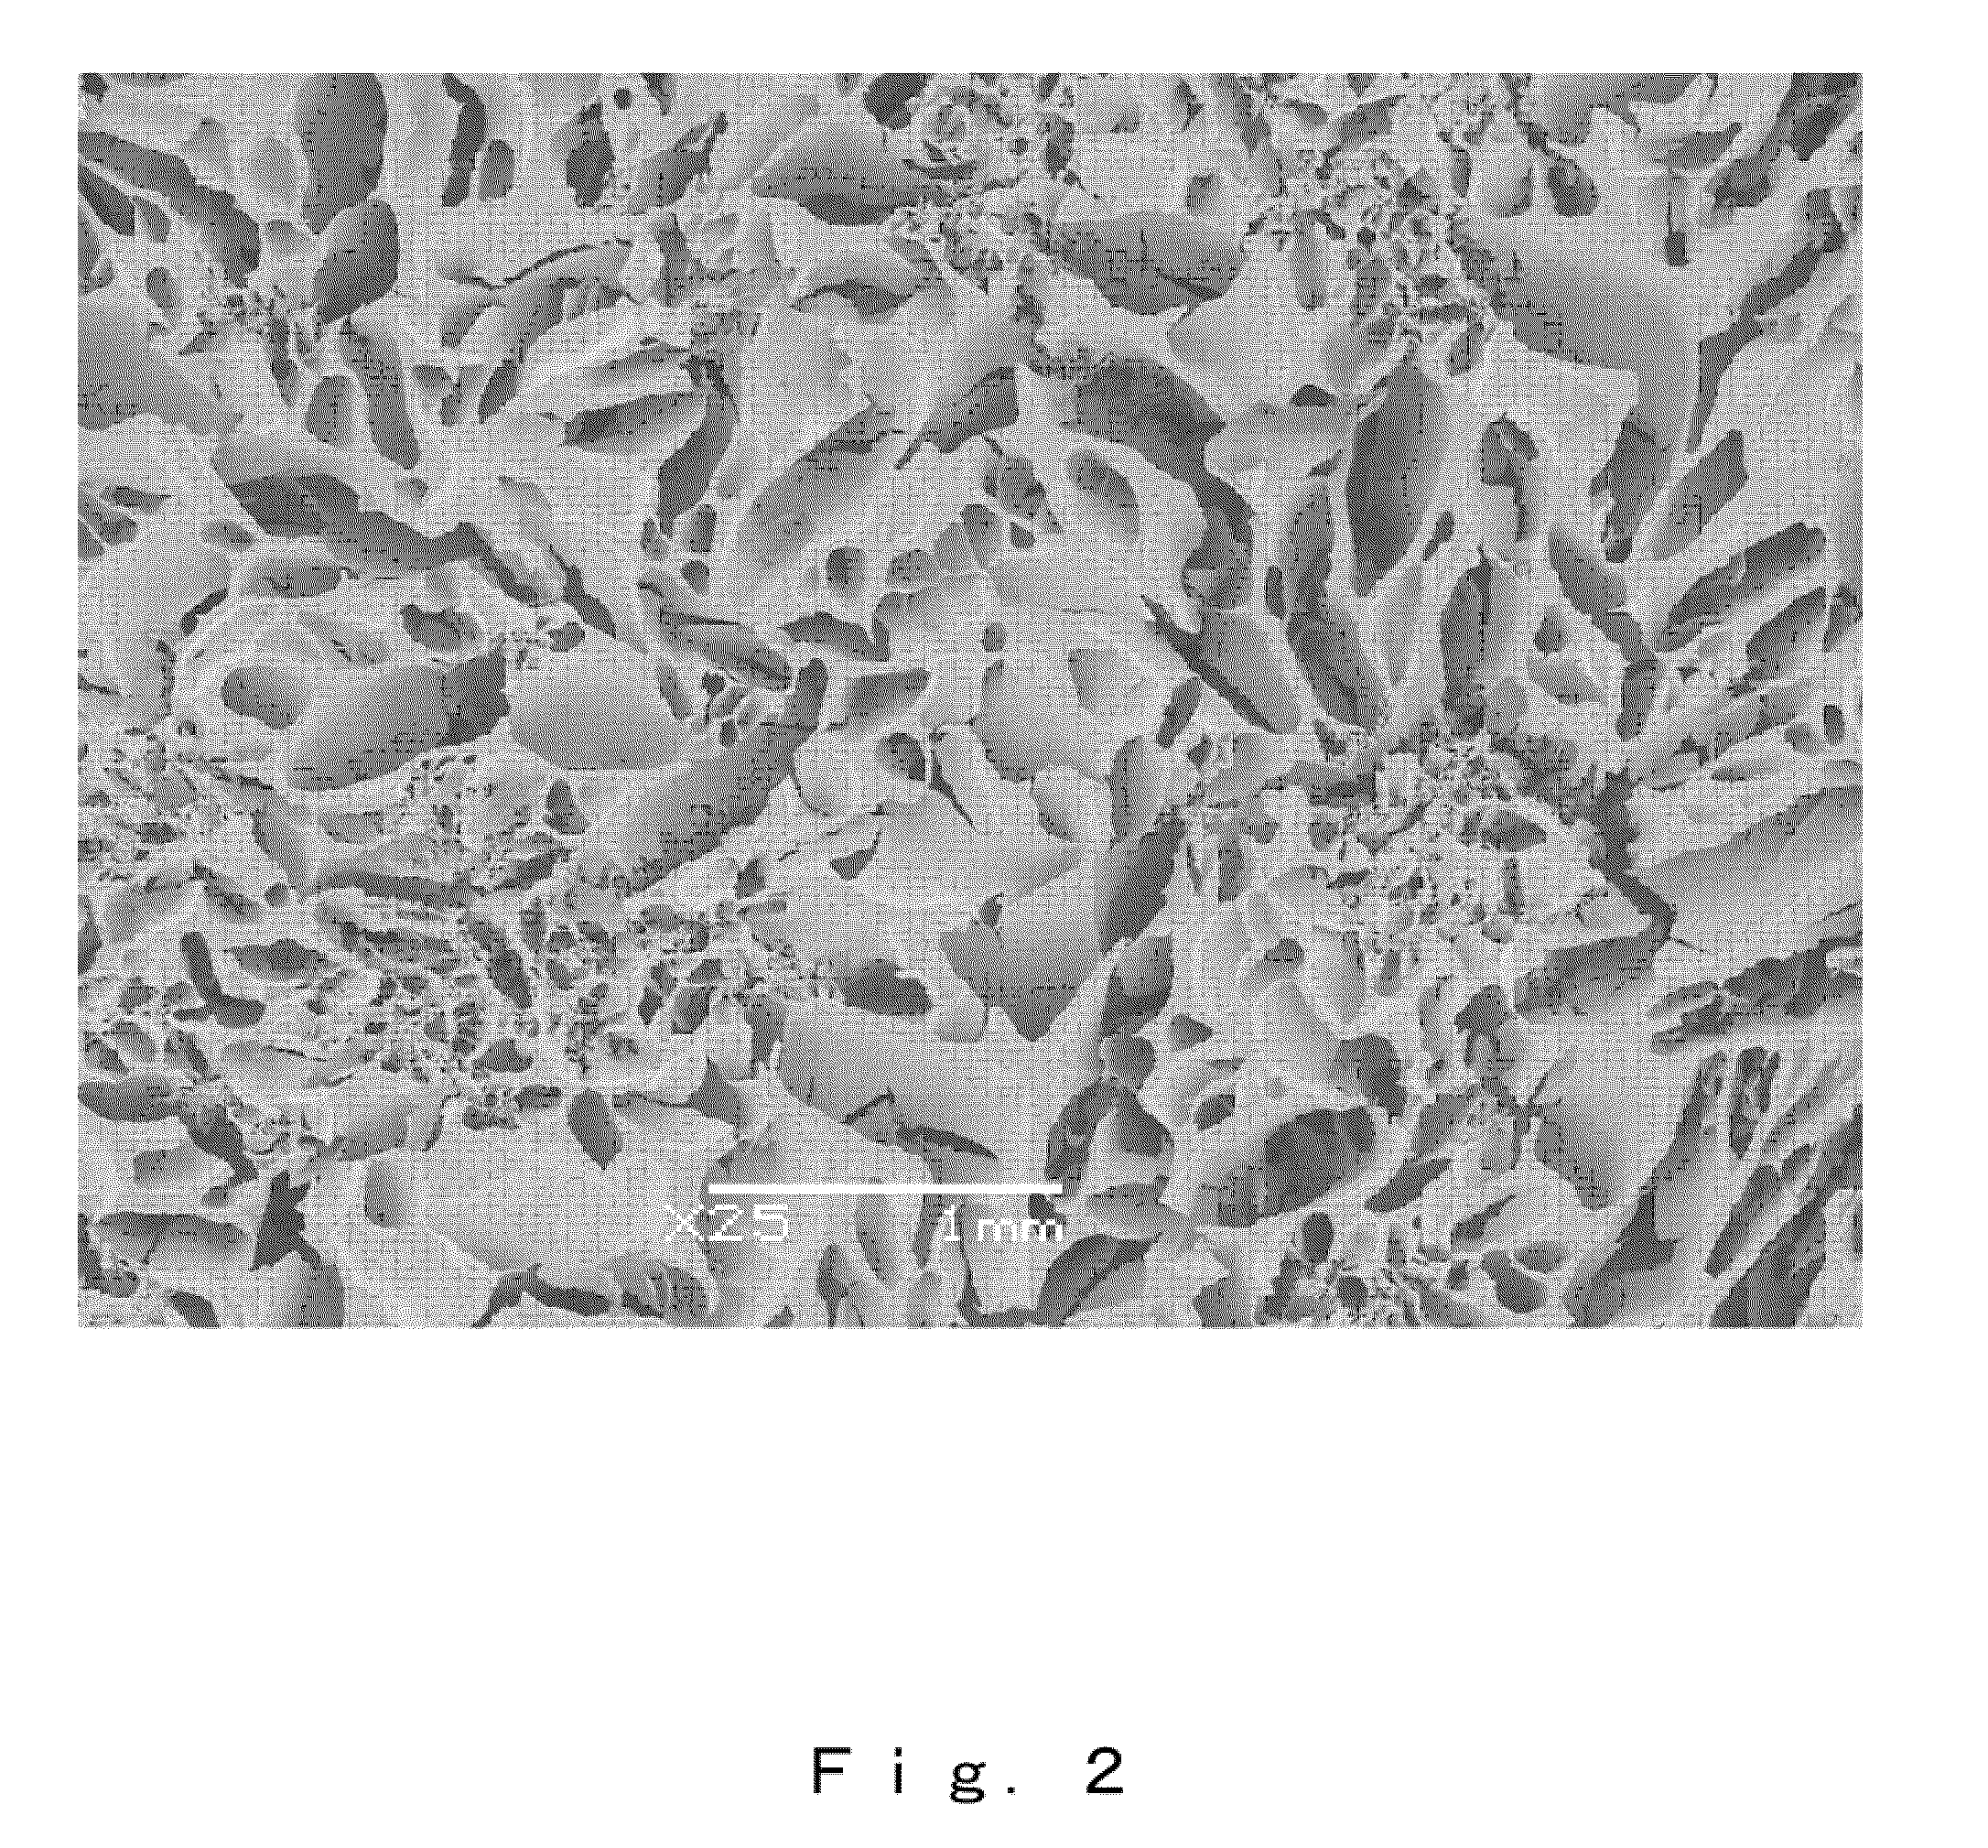 Ceramic porous body with communication macropores and process for producing the ceramic porous body